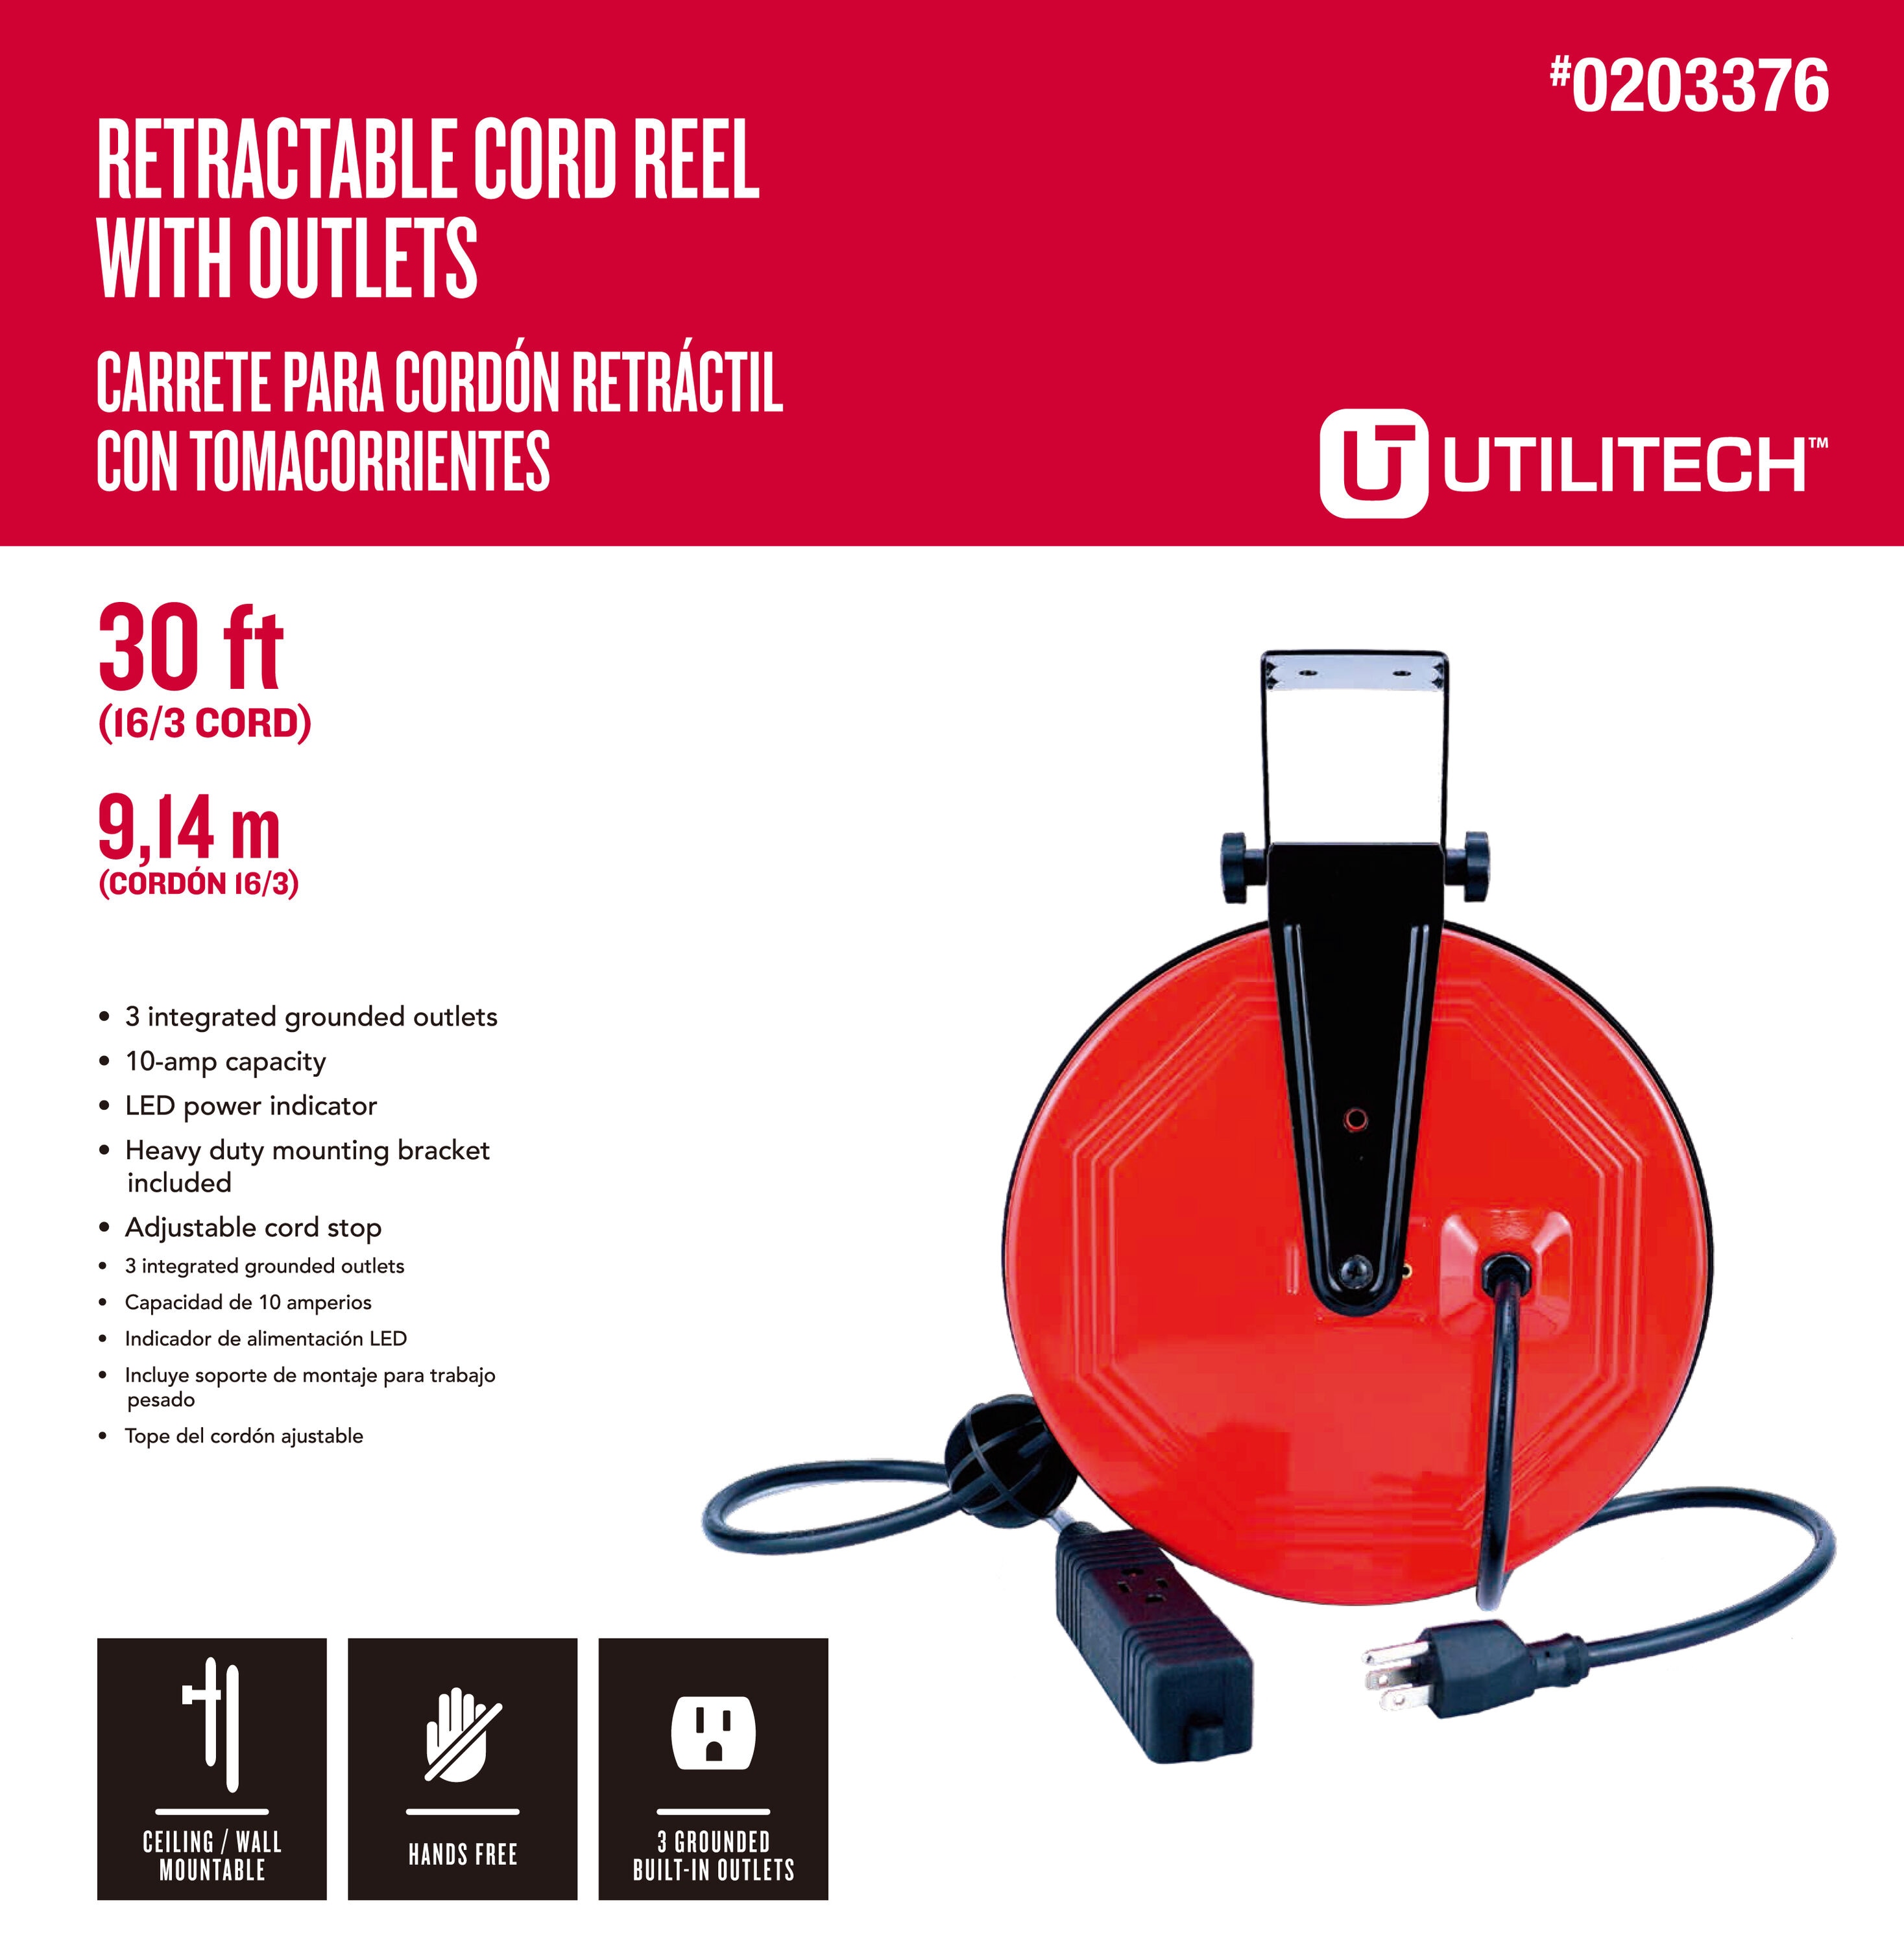 Wall-Mounted Retractable Extension Cord Review and Set Up